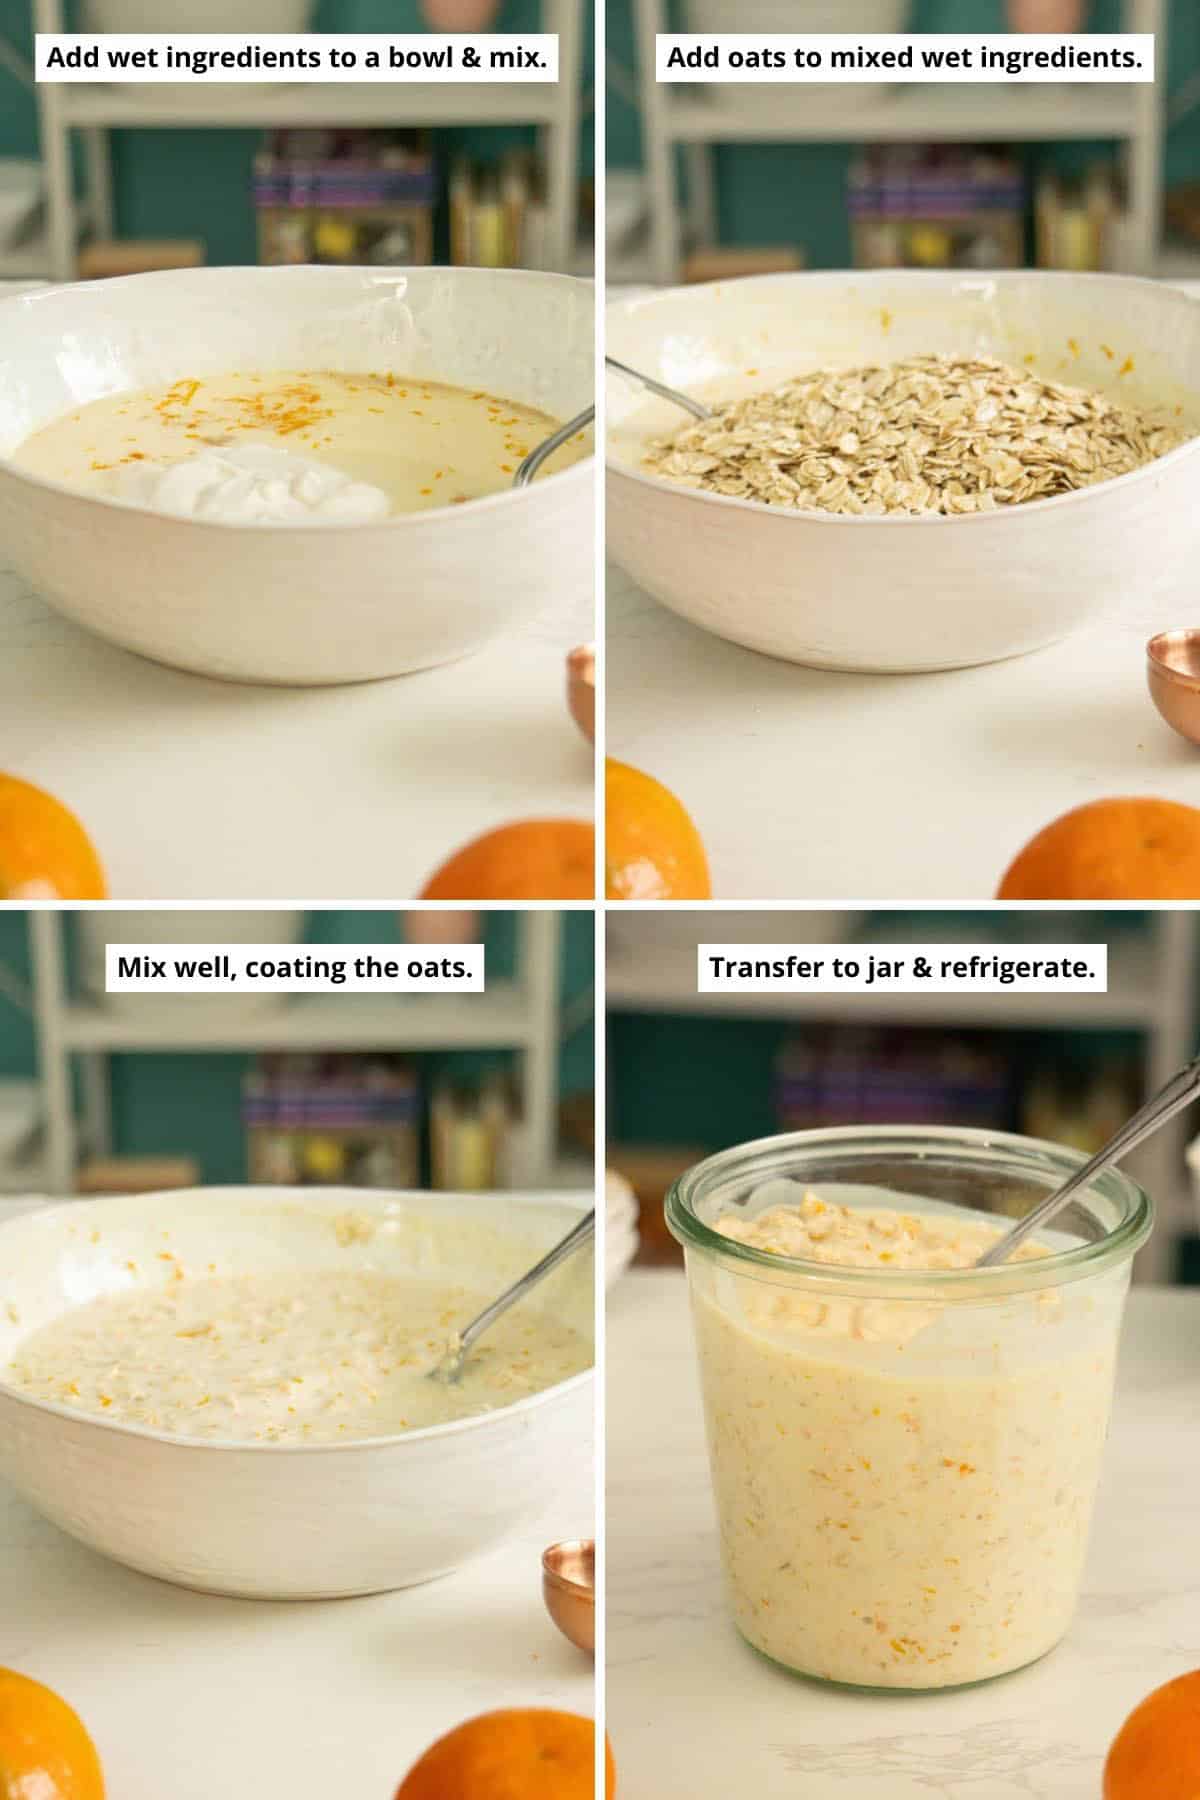 image collage showing wet ingredients in the bowl, adding the oats, the mixture after mixing in the bowl and in a jar